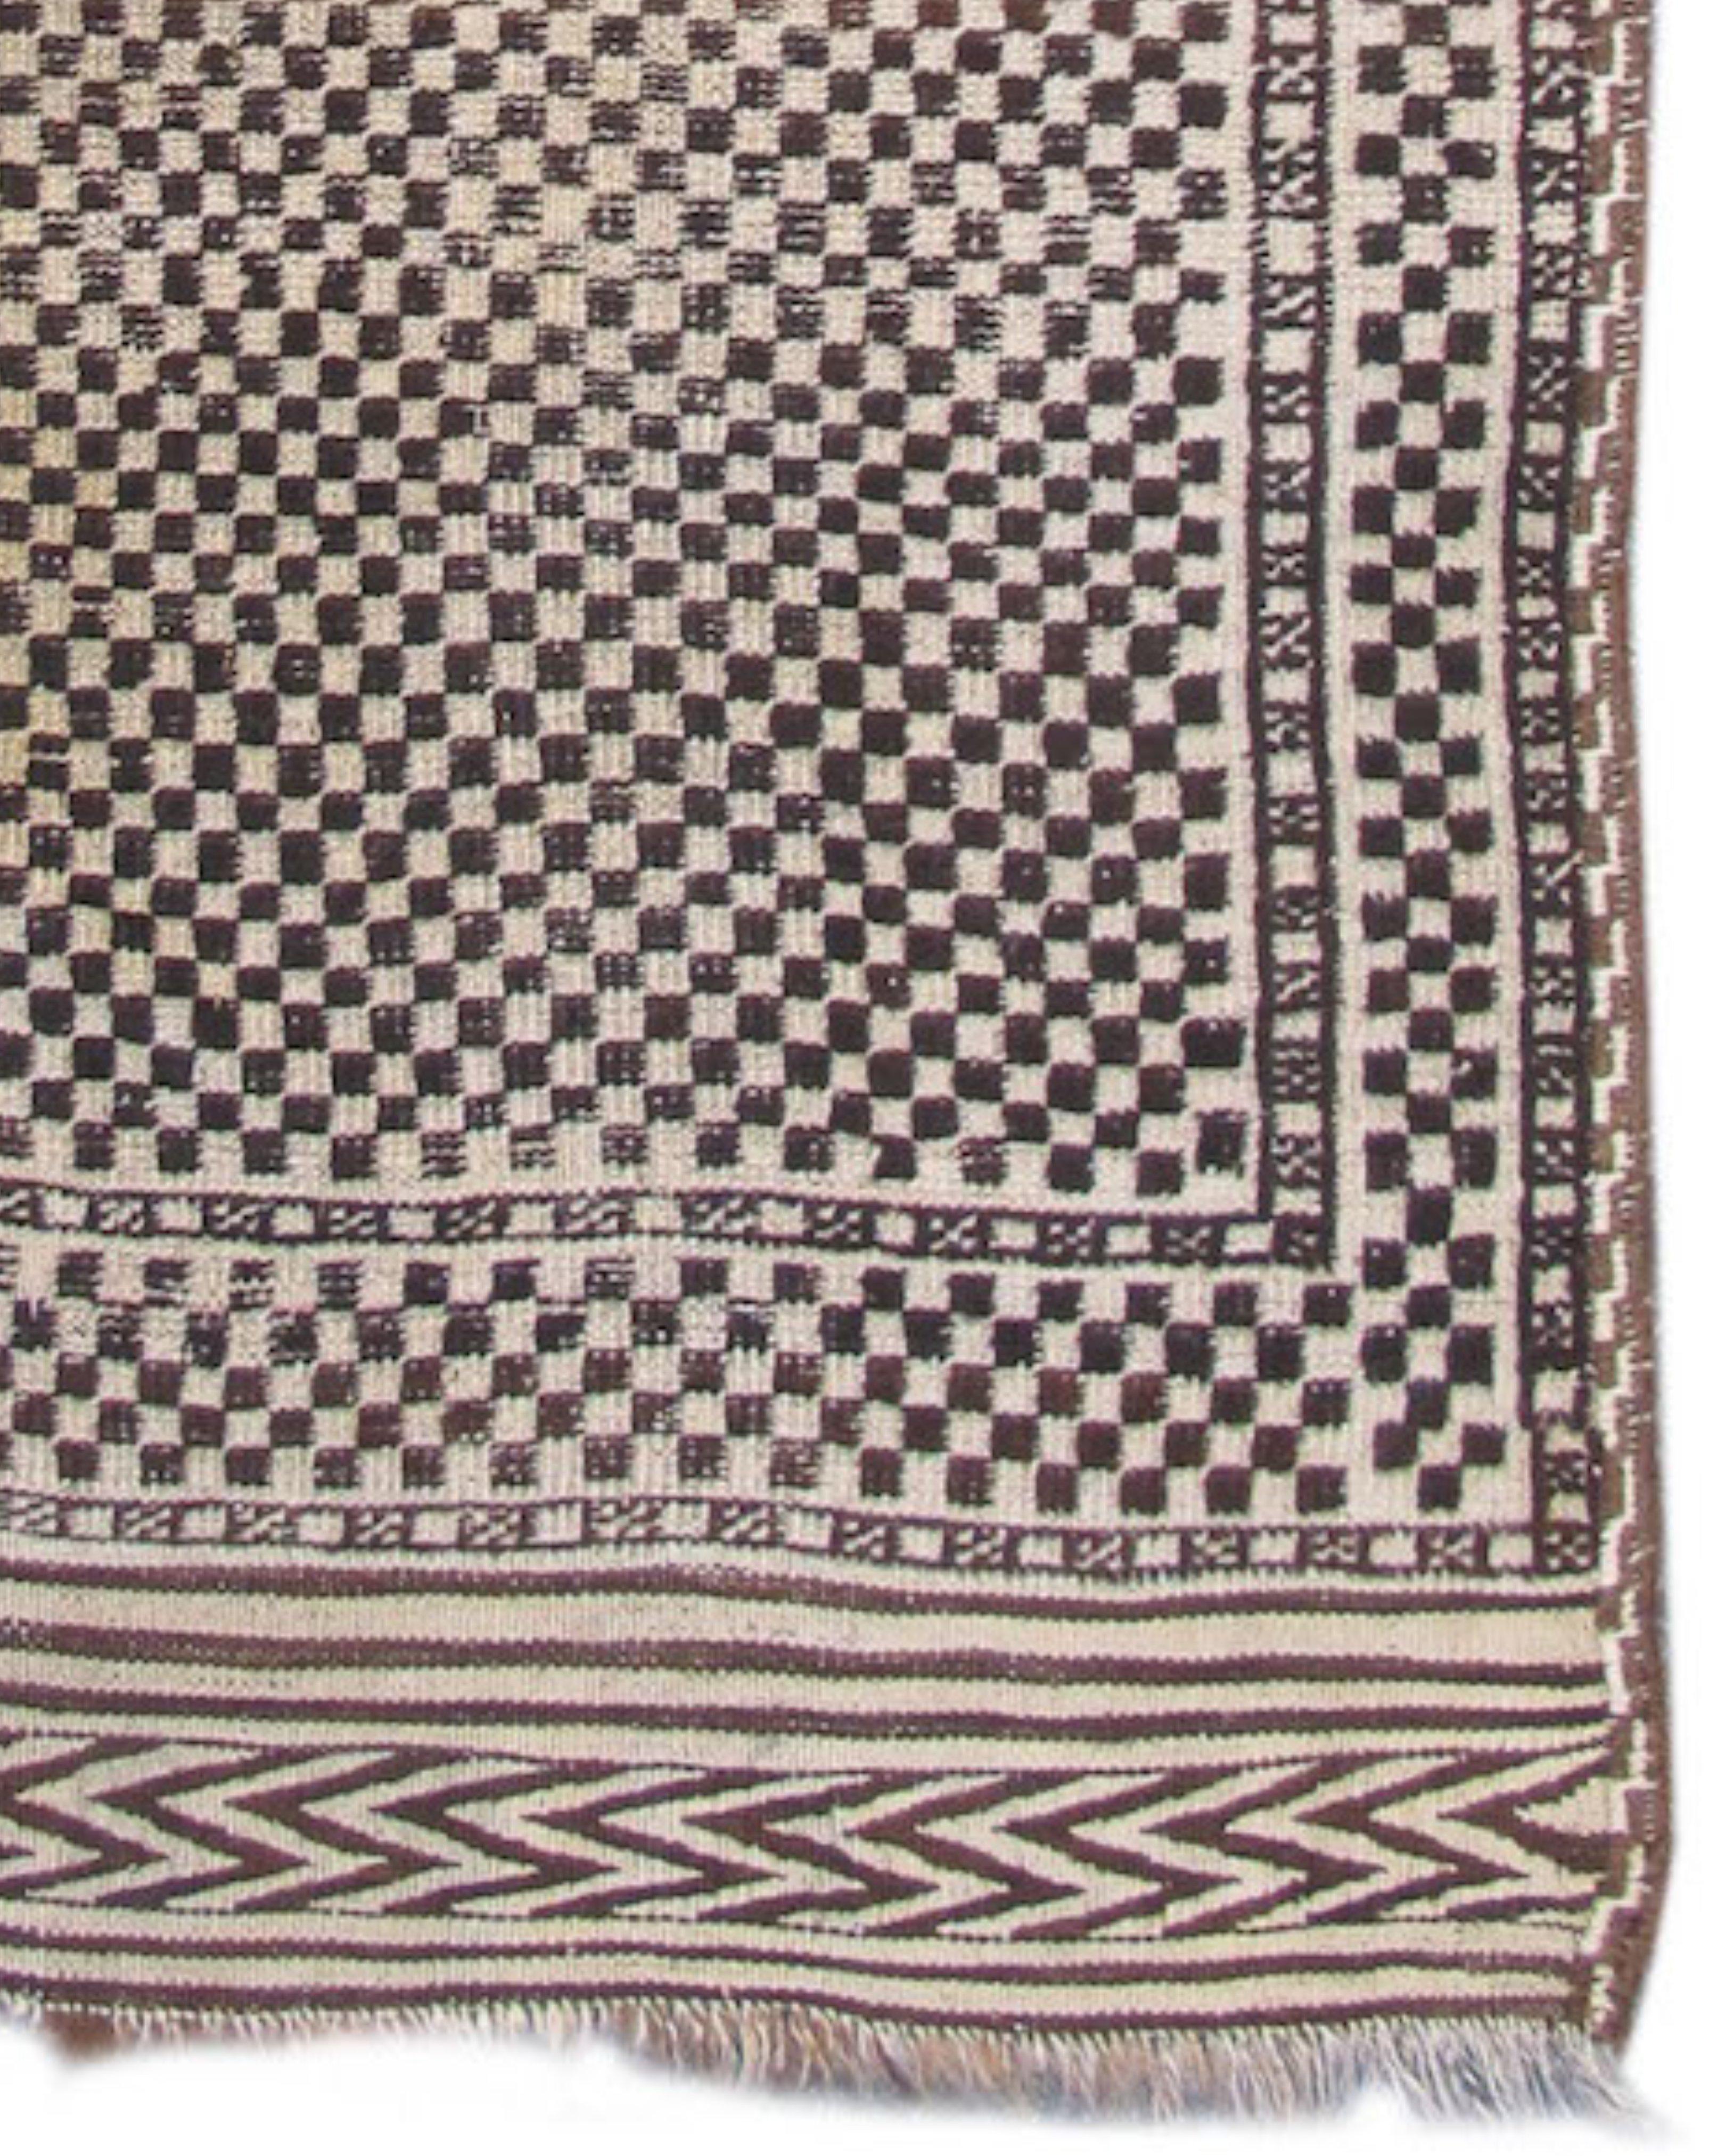 Antique Afghan Checkerboard Rug, Early 20th Century 1